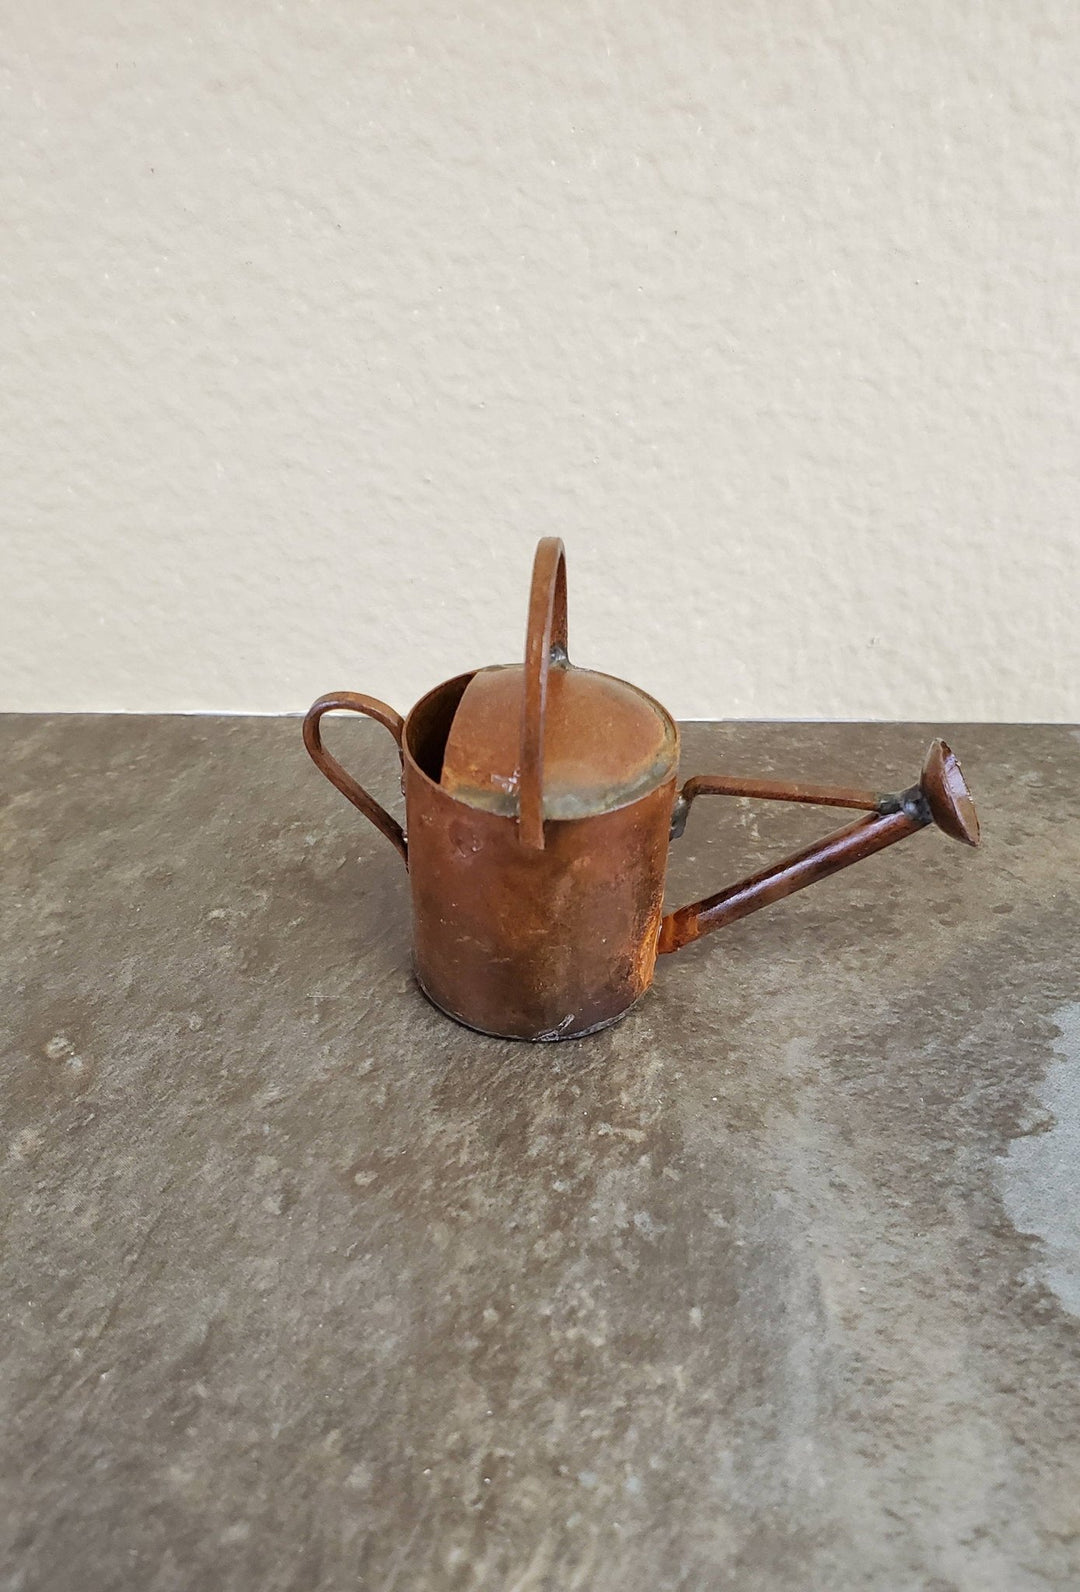 Dollhouse Miniature Large Metal Watering Can with Handle Rusted Aged 1:6 Scale Garden - Miniature Crush